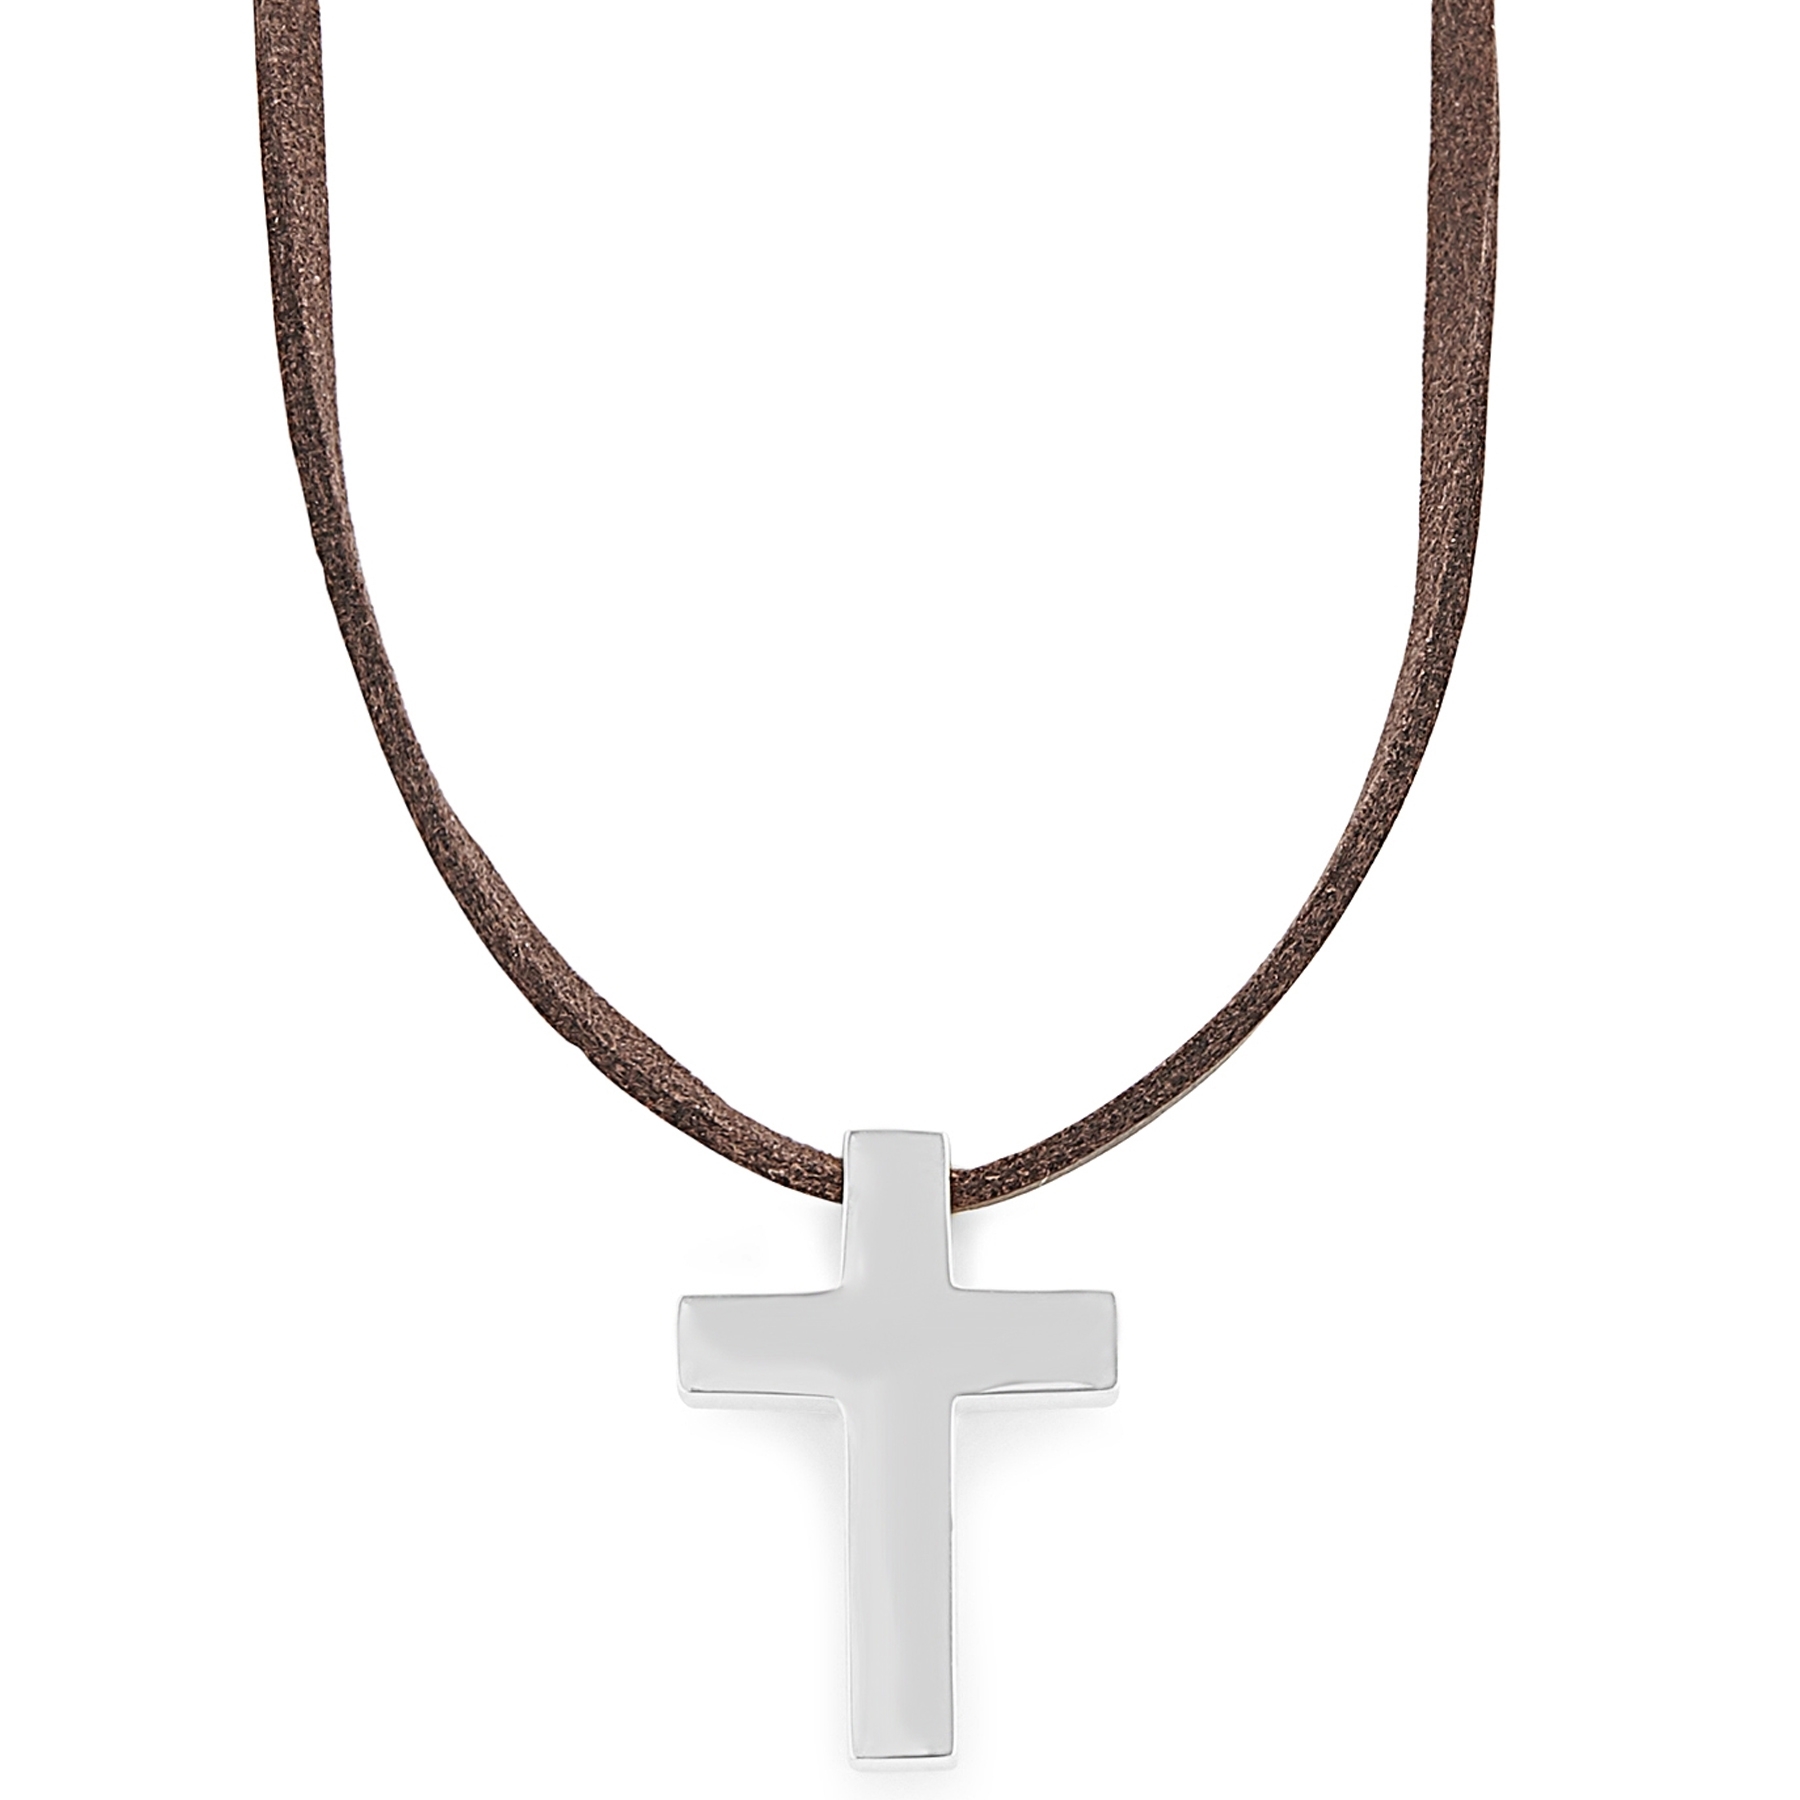 22 Karat Yellow Gold and Leather Cross Necklace by Denise Roberge - M.J.  Bohan Co., Inc.